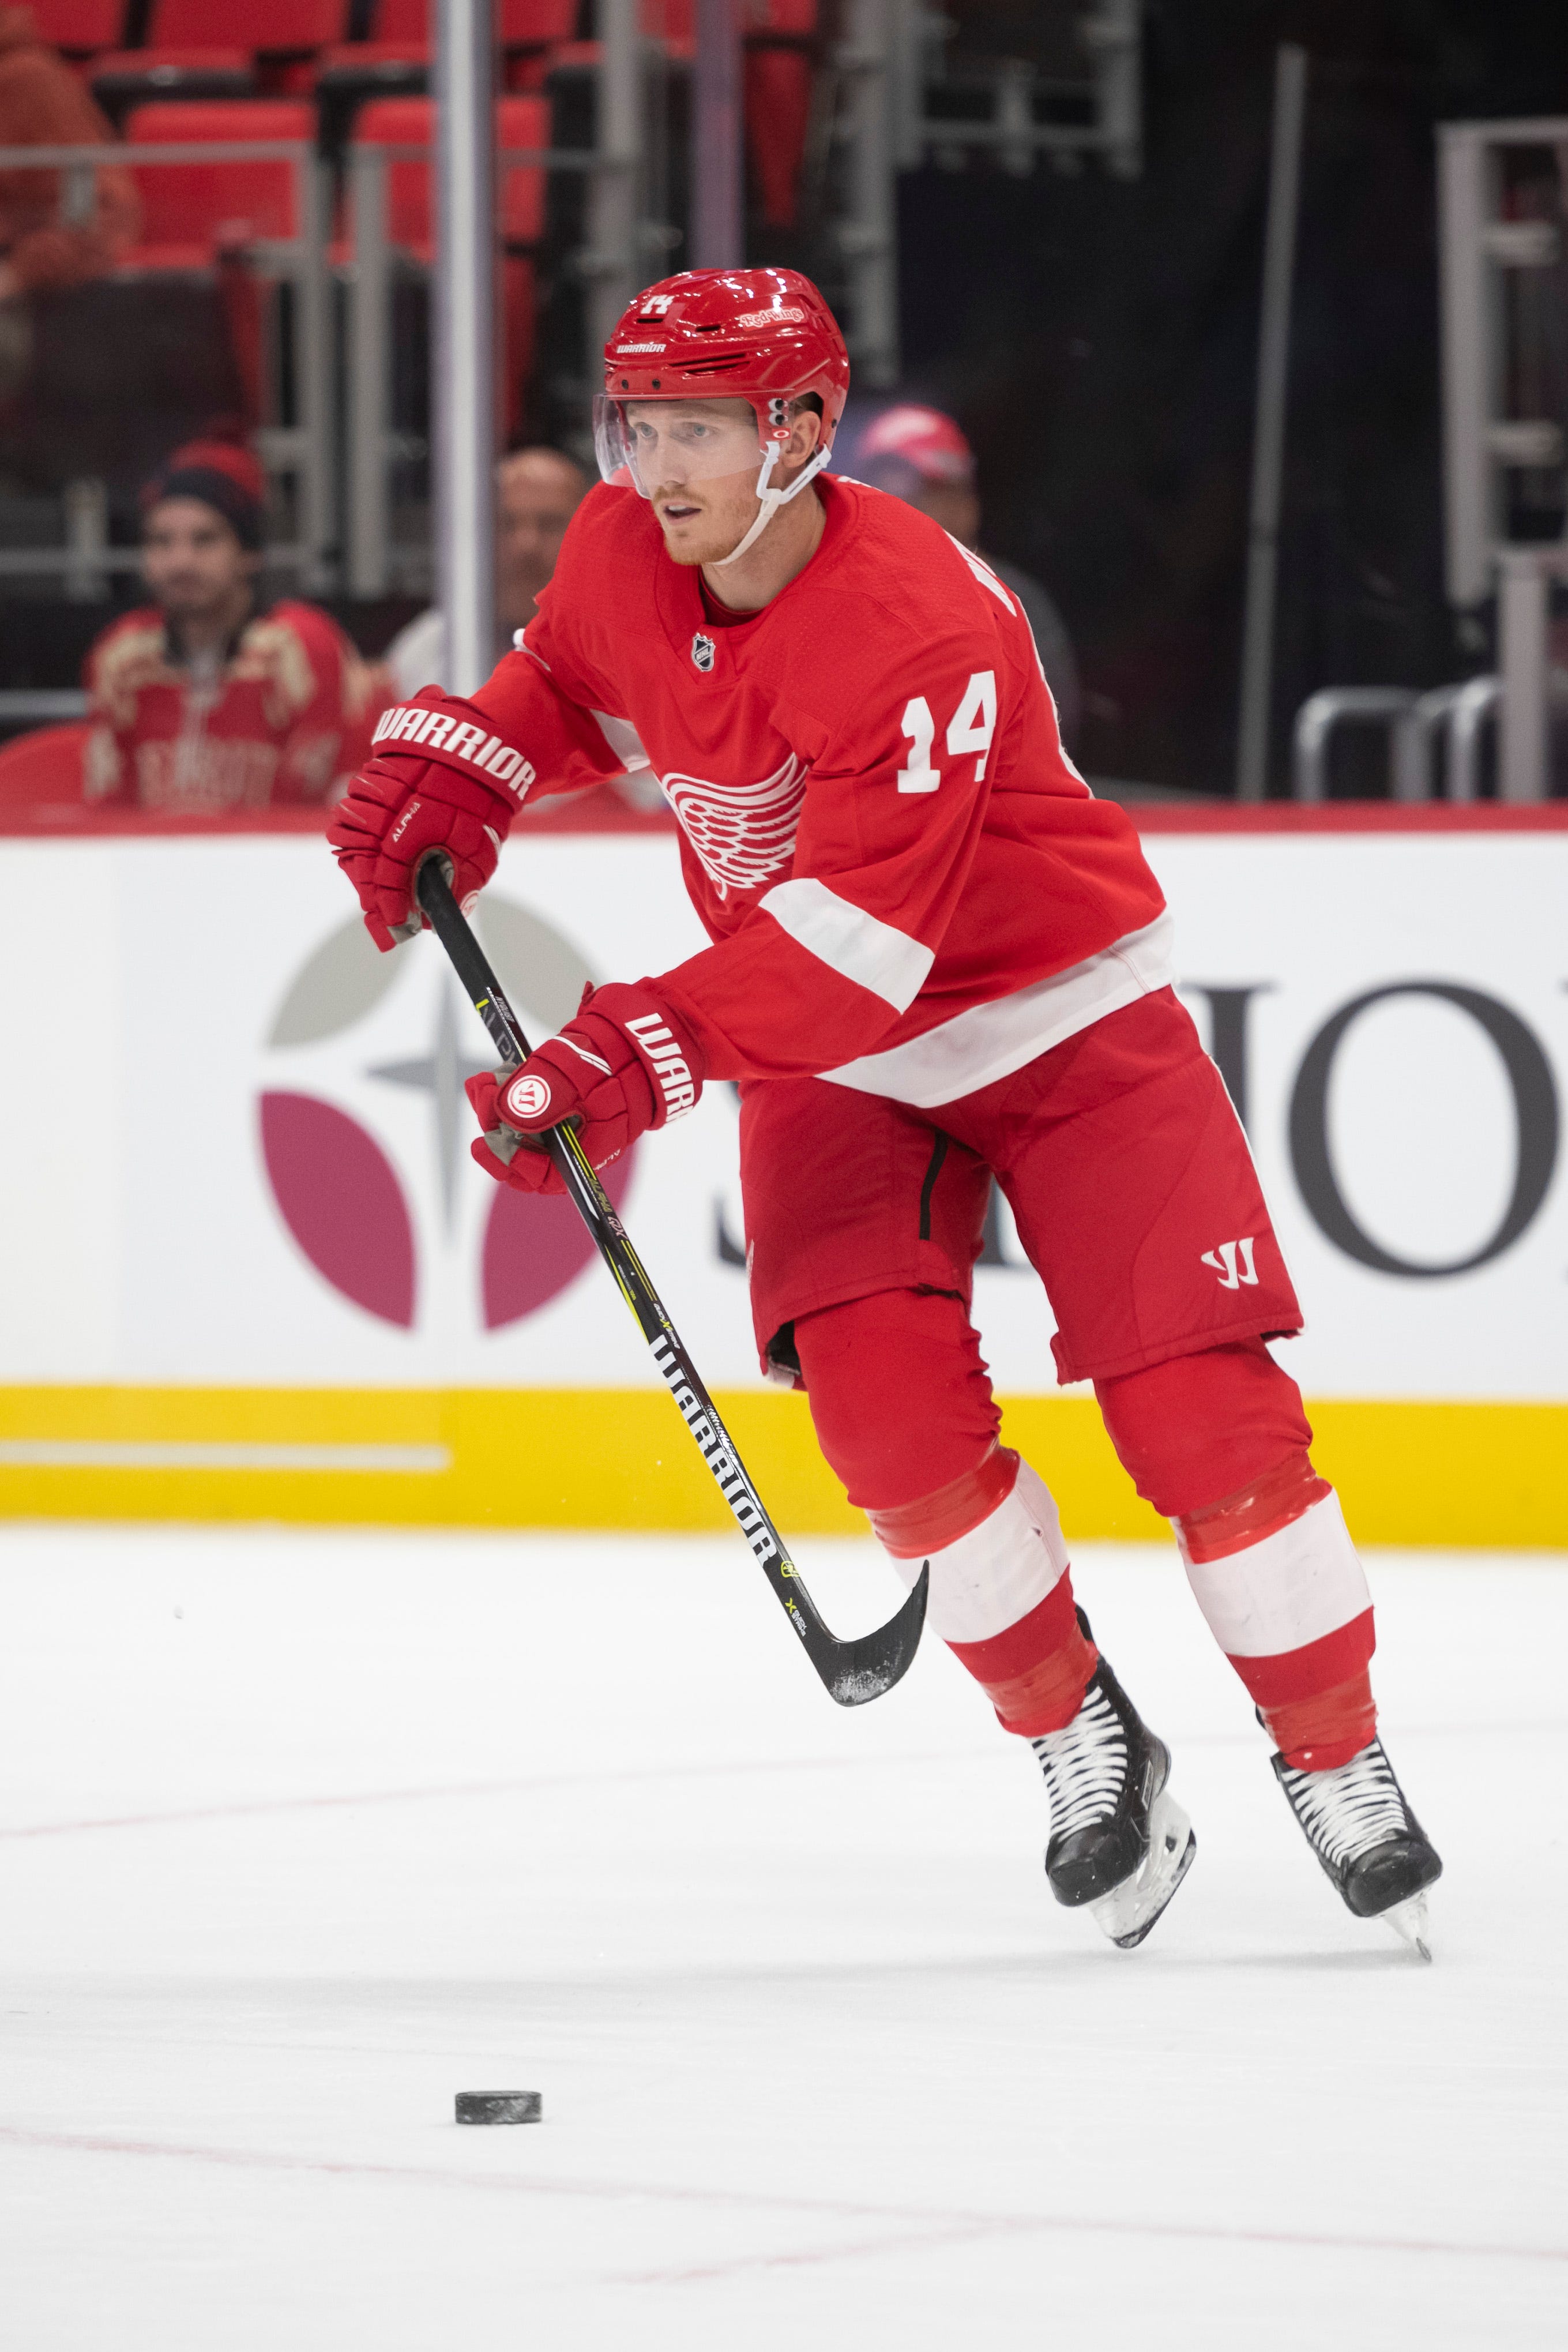 GUSTAV NYQUIST: AGE: 29. HT: 5-11. WT: 184. STATS: 82 games, 21 goals, 19 assists, 40 points. ANALYSIS: In the final year of his contract, Nyquist likely will become a prime trade chip at the deadline. Nyquist was one of the better Red Wings throughout training camp and preseason games.